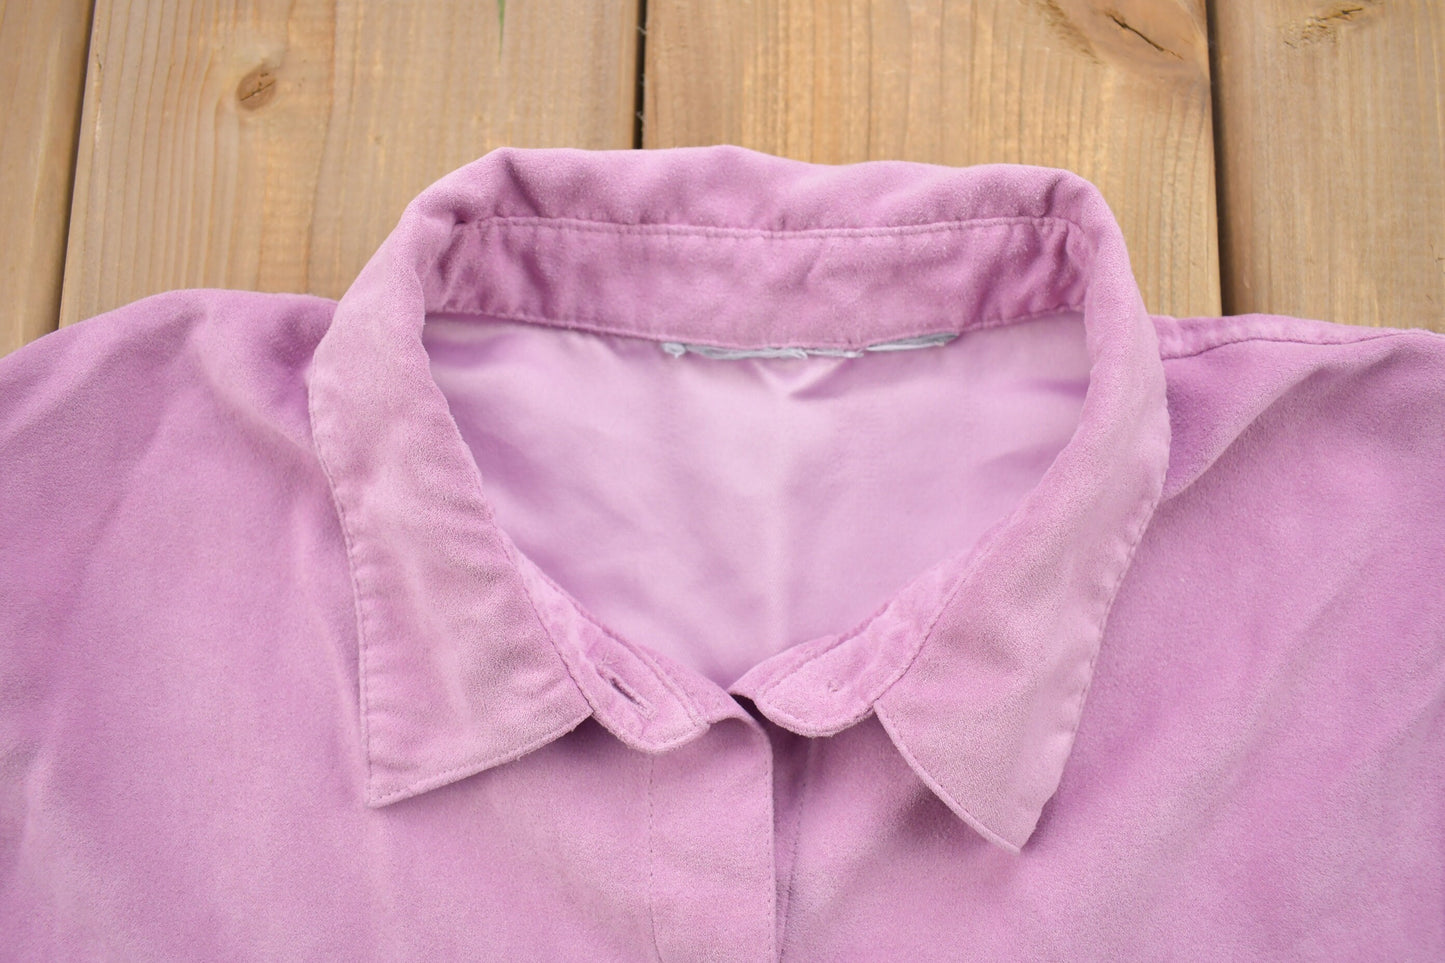 Vintage 1990s Pink Suede Button Up Shirt / 1990s Button Up / Made in USA / Vintage Flannel / Casual Wear / Workwear / Pattern Button Up